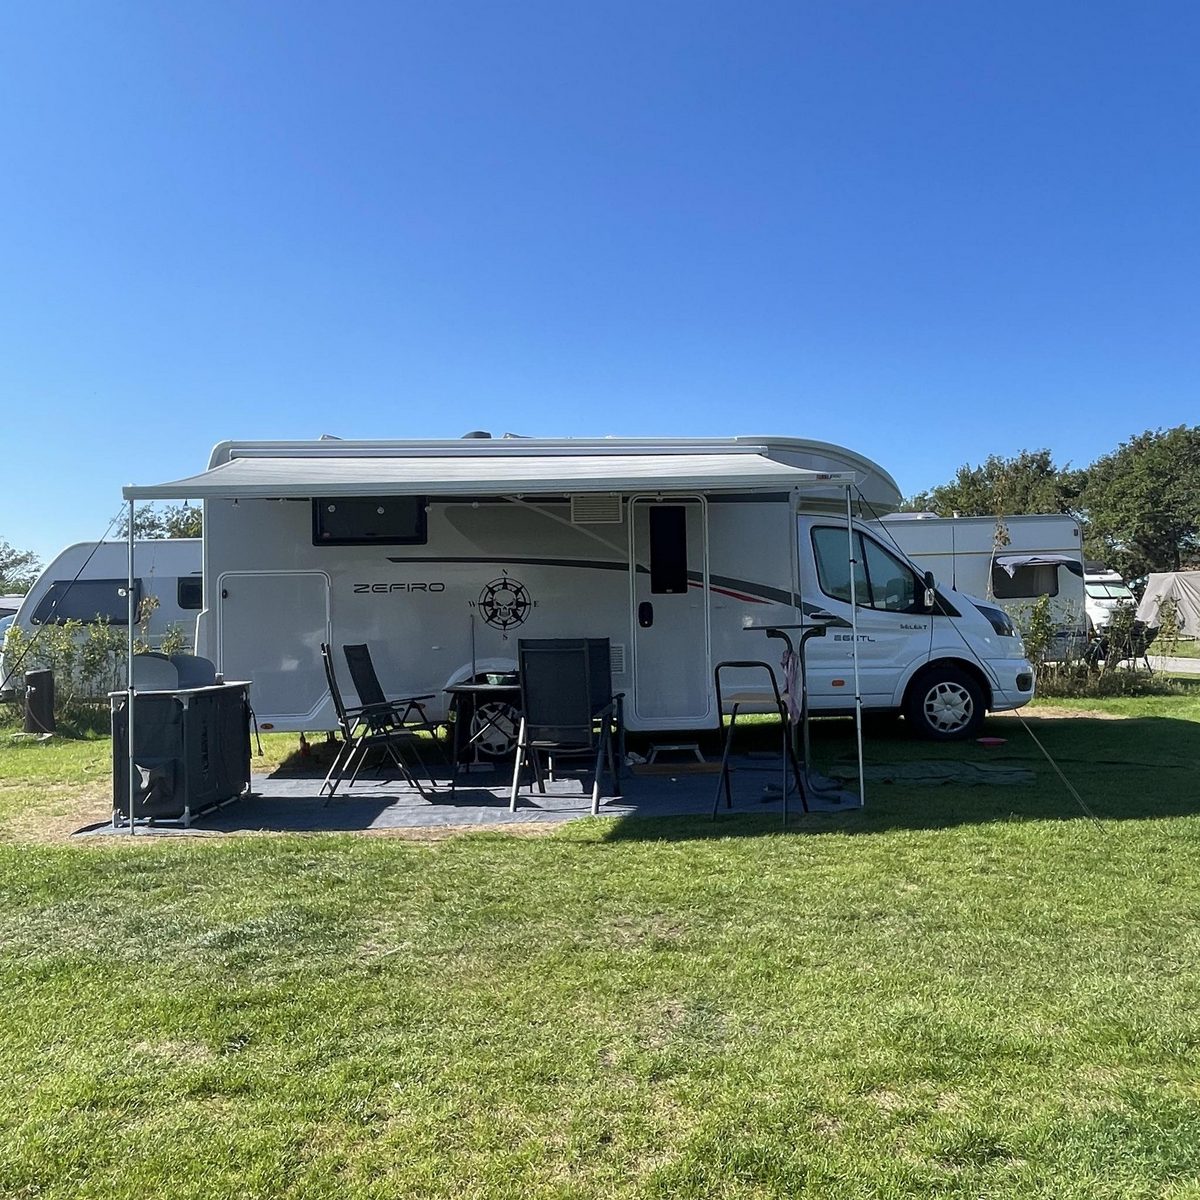 Camping XL pitch with convenience